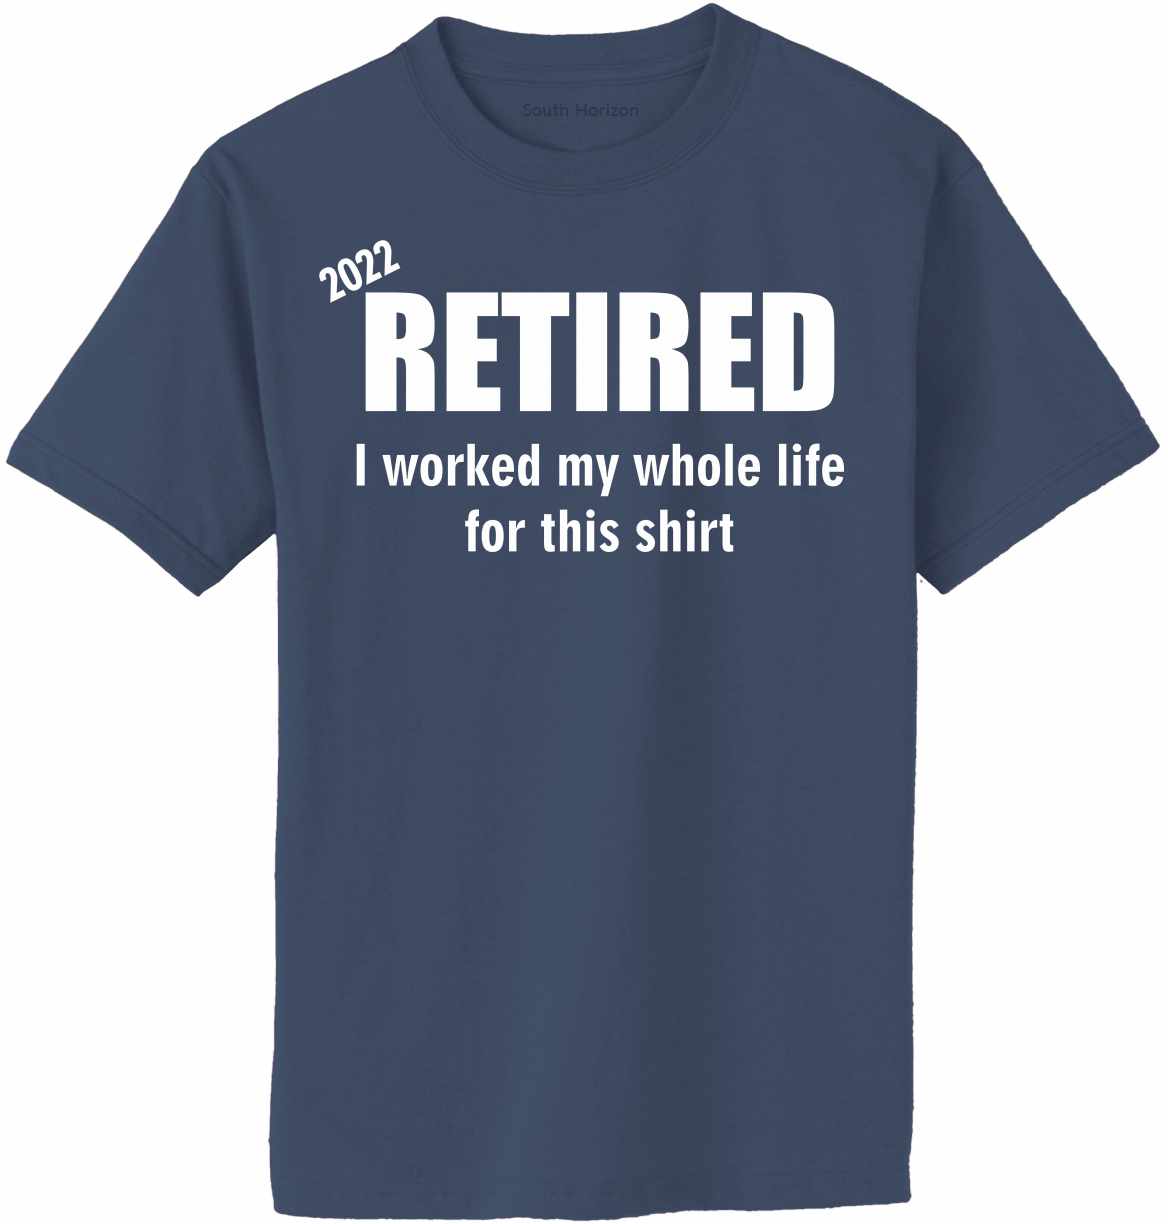 Retired 2022, Worked Whole Life on Adult T-Shirt